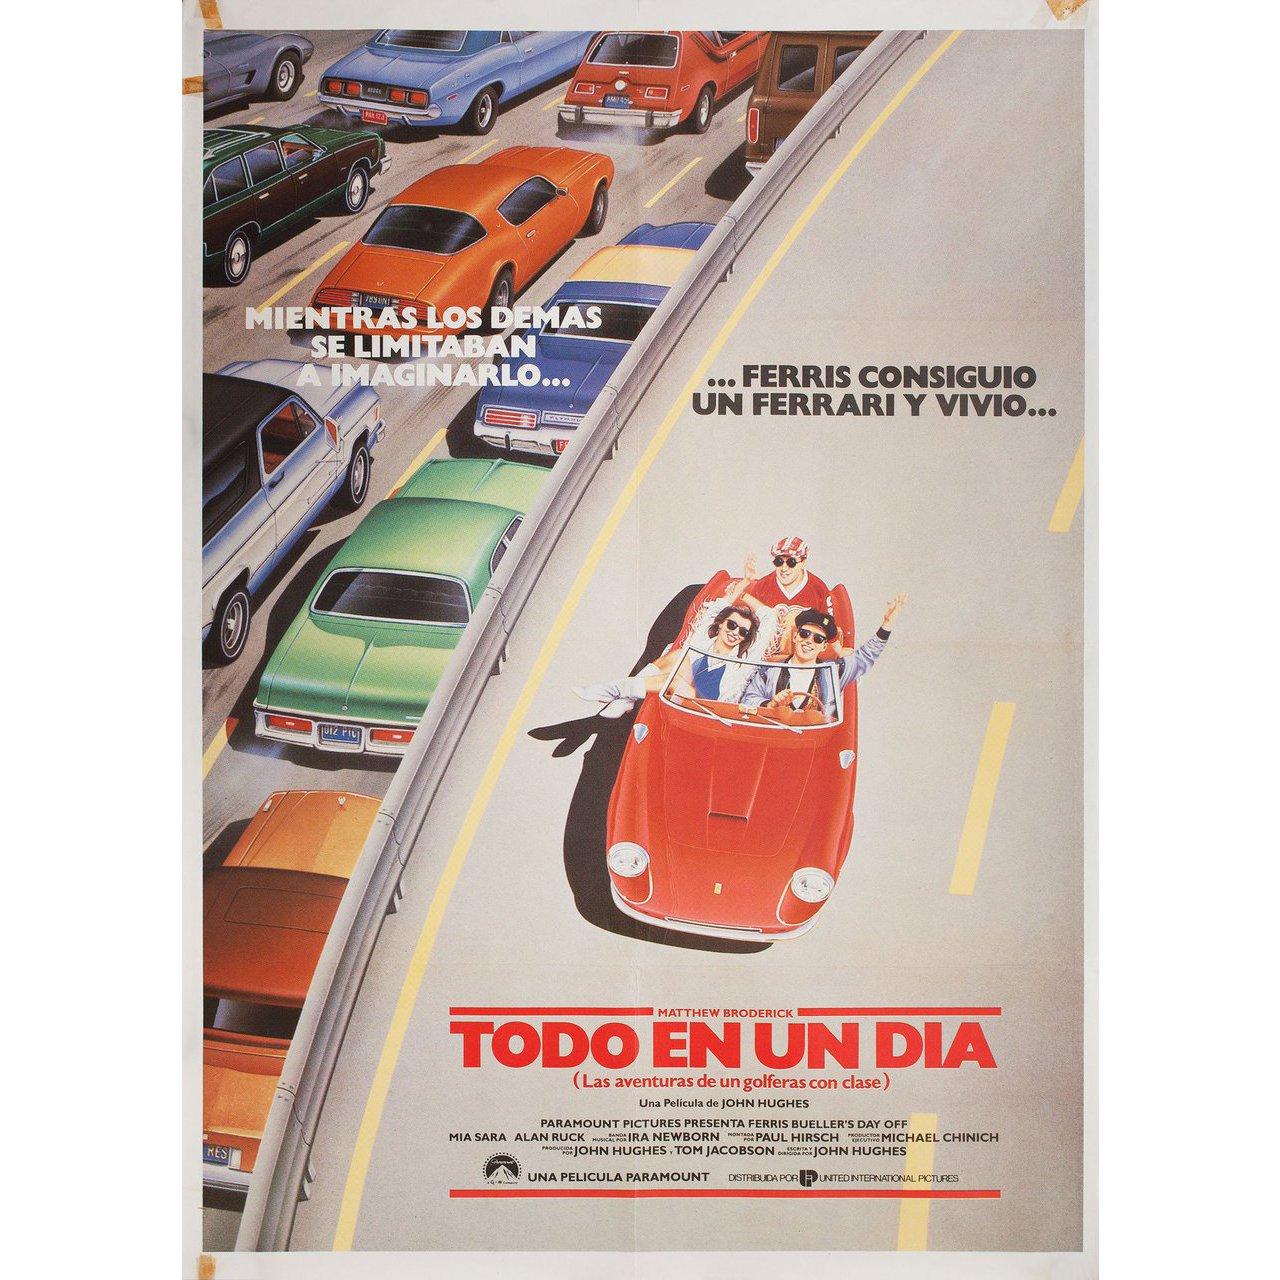 Original 1986 Spanish B1 poster for the film Ferris Bueller's Day Off directed by John Hughes with Matthew Broderick / Alan Ruck / Mia Sara / Jeffrey Jones. Very Good condition, folded with pinholes. Many original posters were issued folded or were